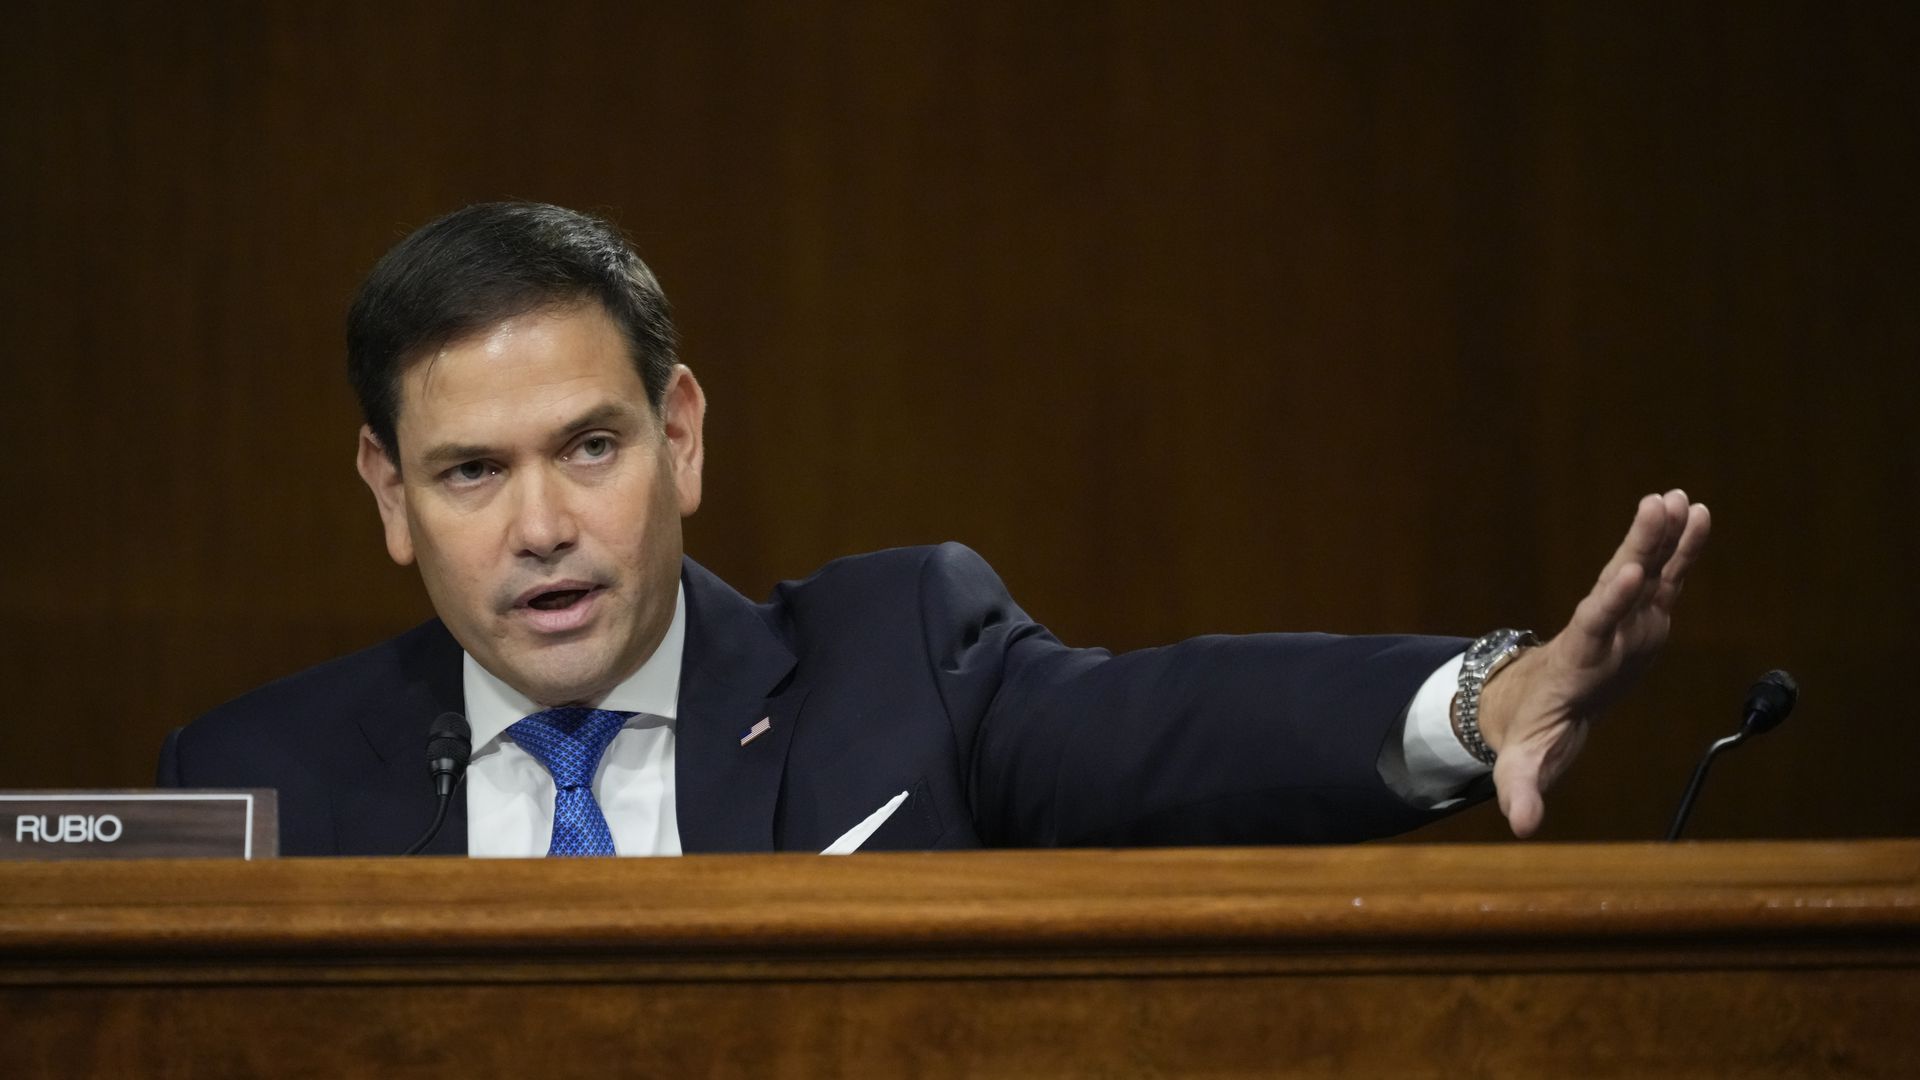 Scoop: Rubio demands Airbnb de-list rentals on Chinese land owned by sanctioned group